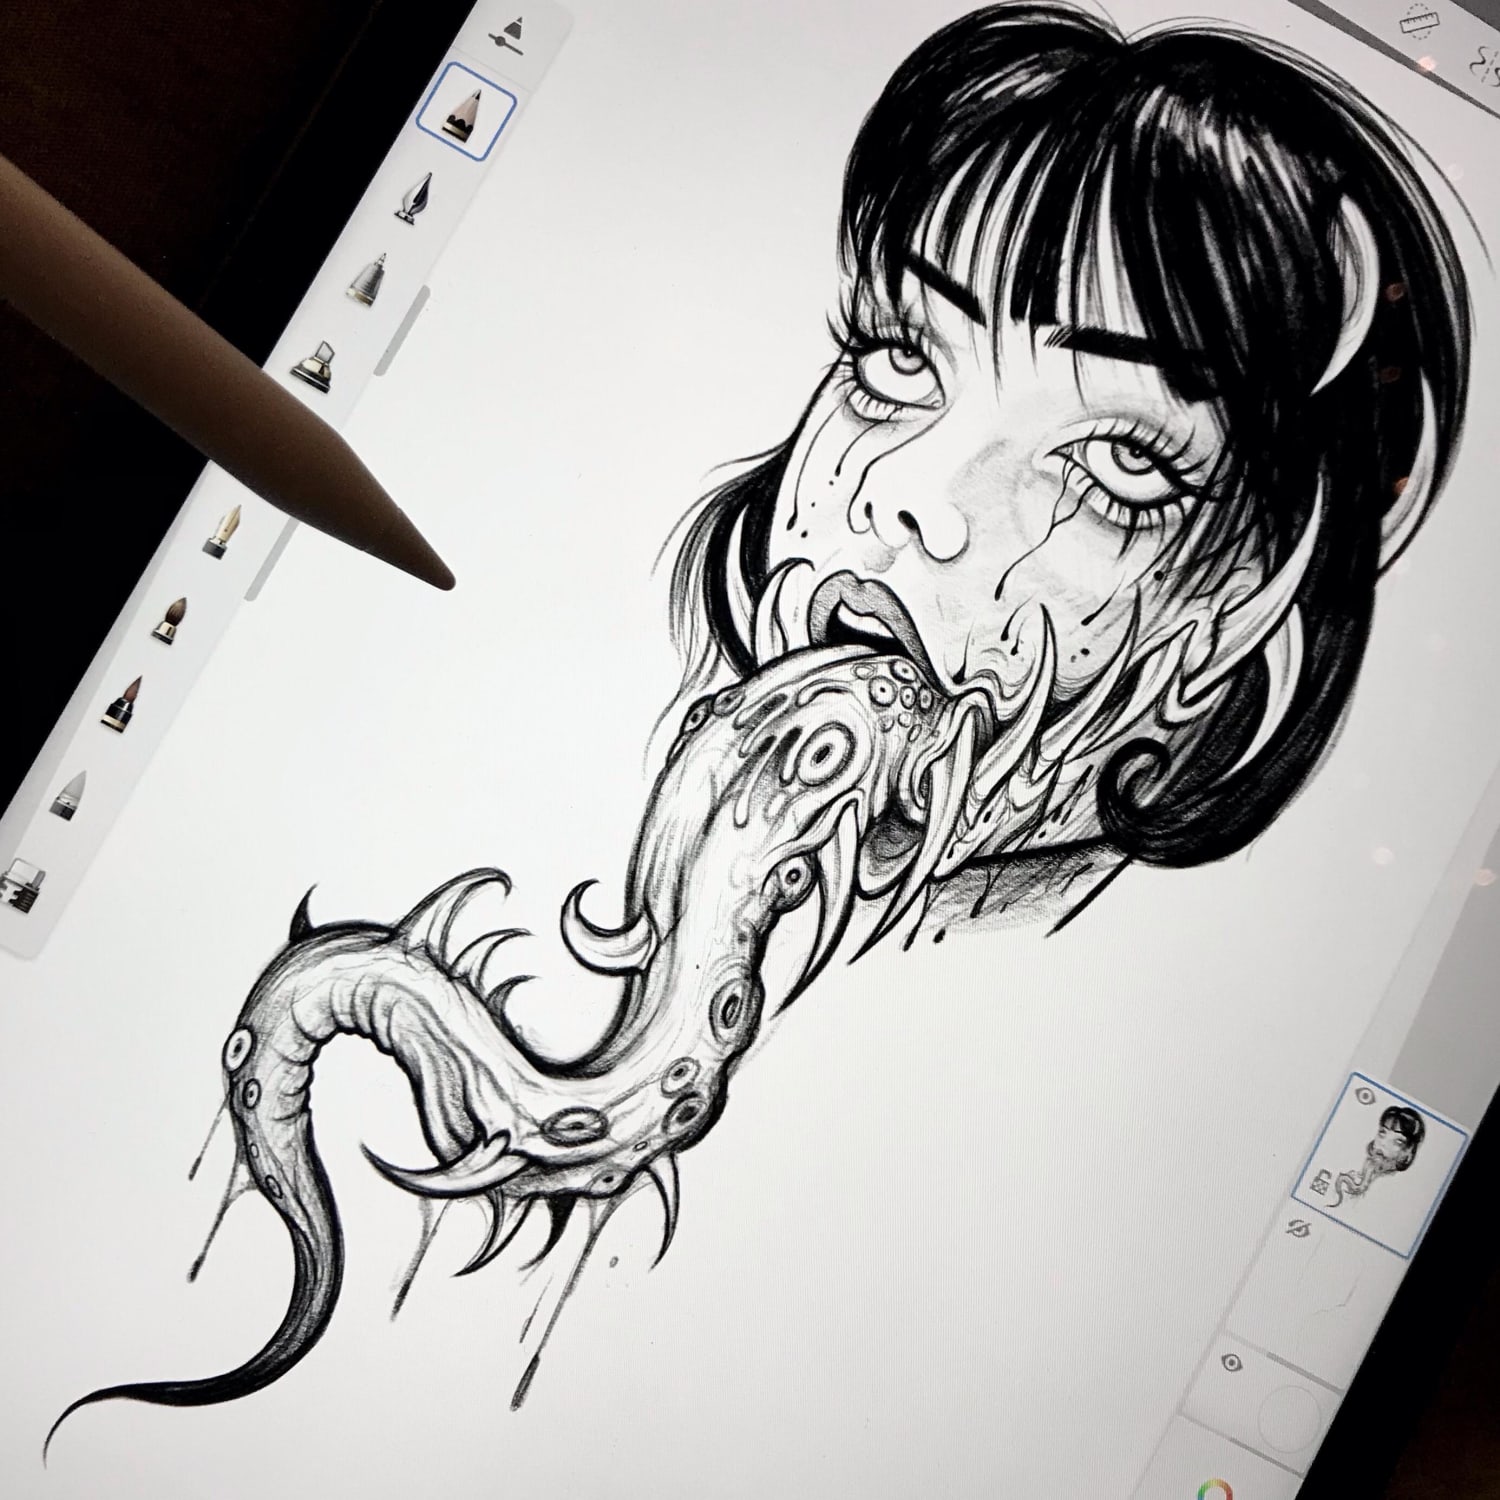 Sketch of a woman with a monster tongue on iPad,what we think?